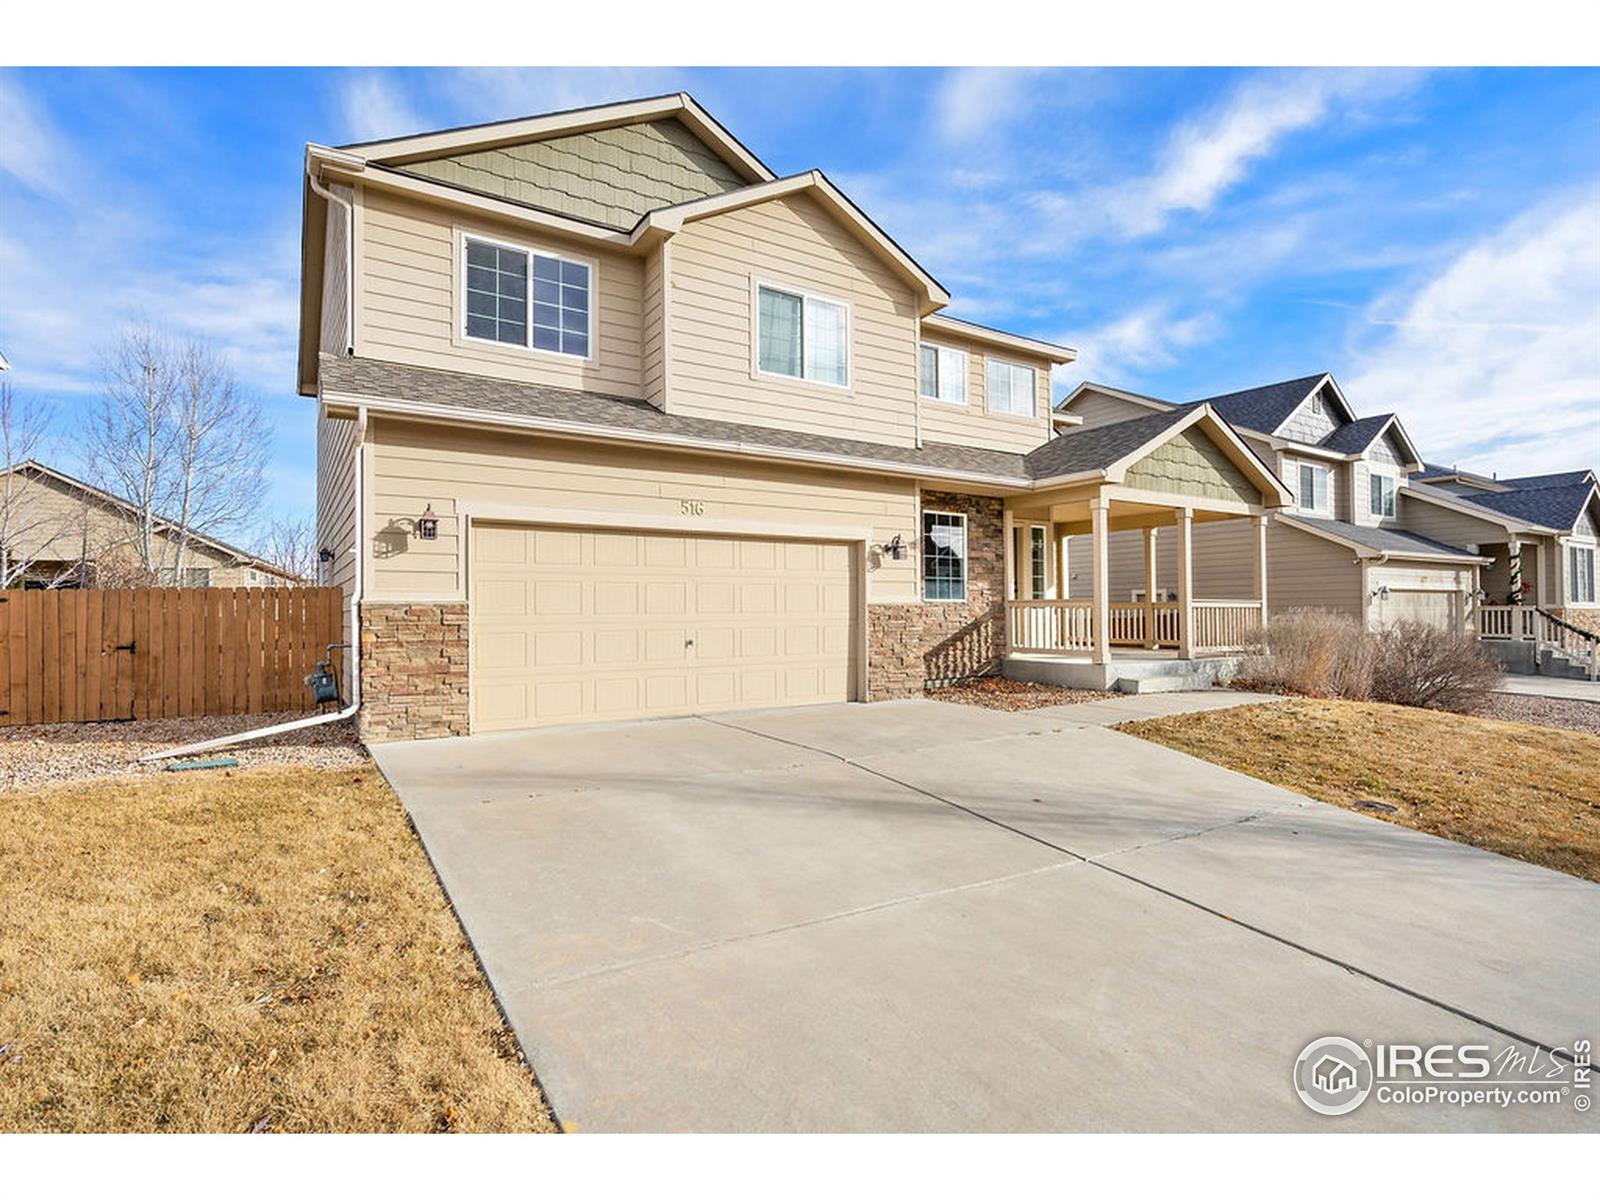 516 Coyote Trail, Fort Collins, CO